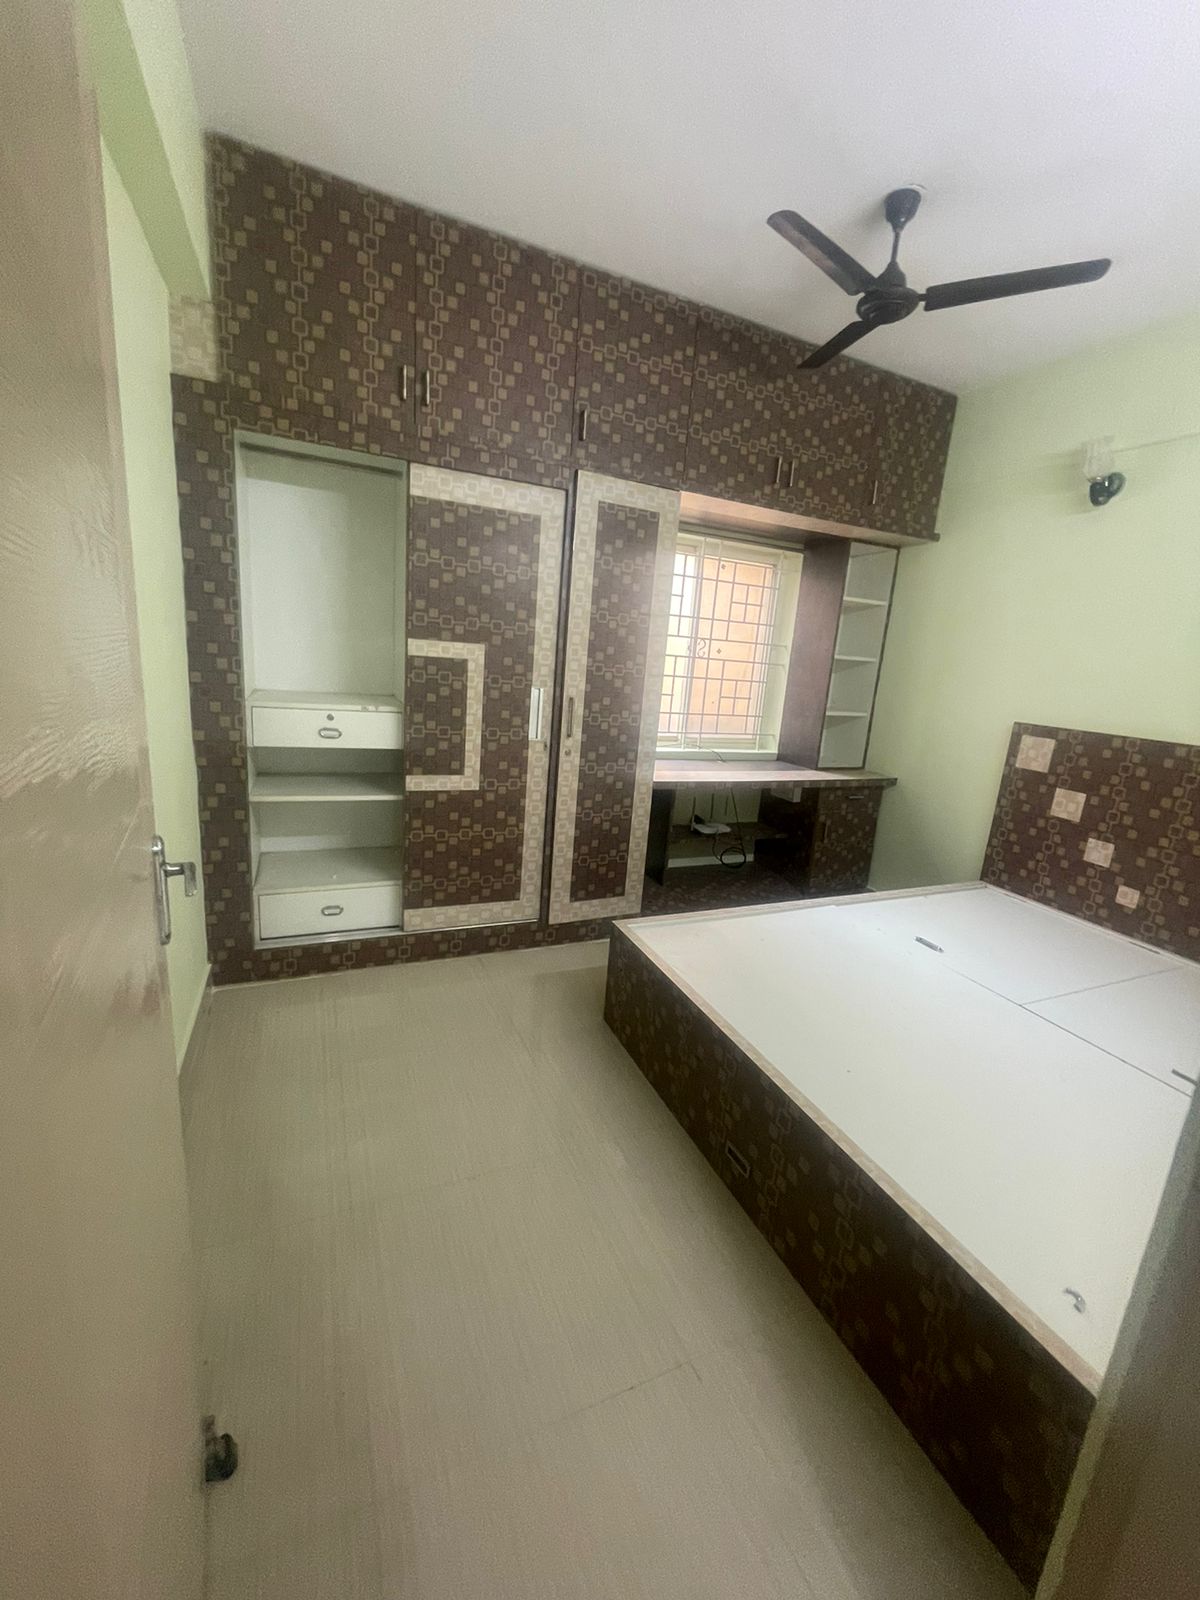 2 BHK Independent House for Lease Only at JAML2 - 4386 in Muneshwara Block